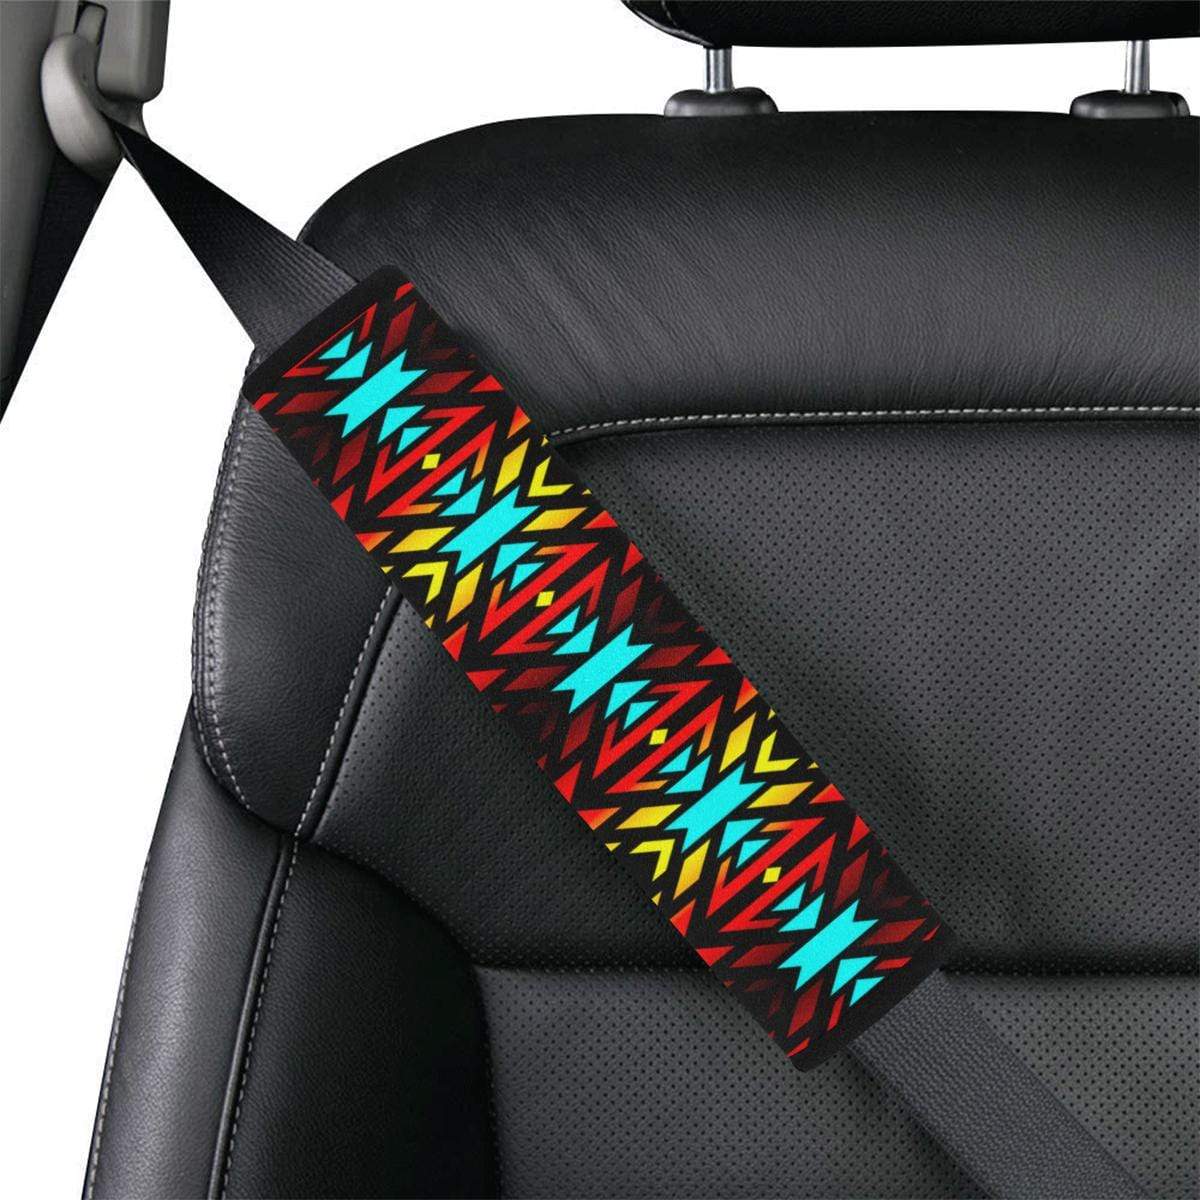 Black Fire and Turquoise Car Seat Belt Cover 7''x12.6'' Car Seat Belt Cover 7''x12.6'' e-joyer 